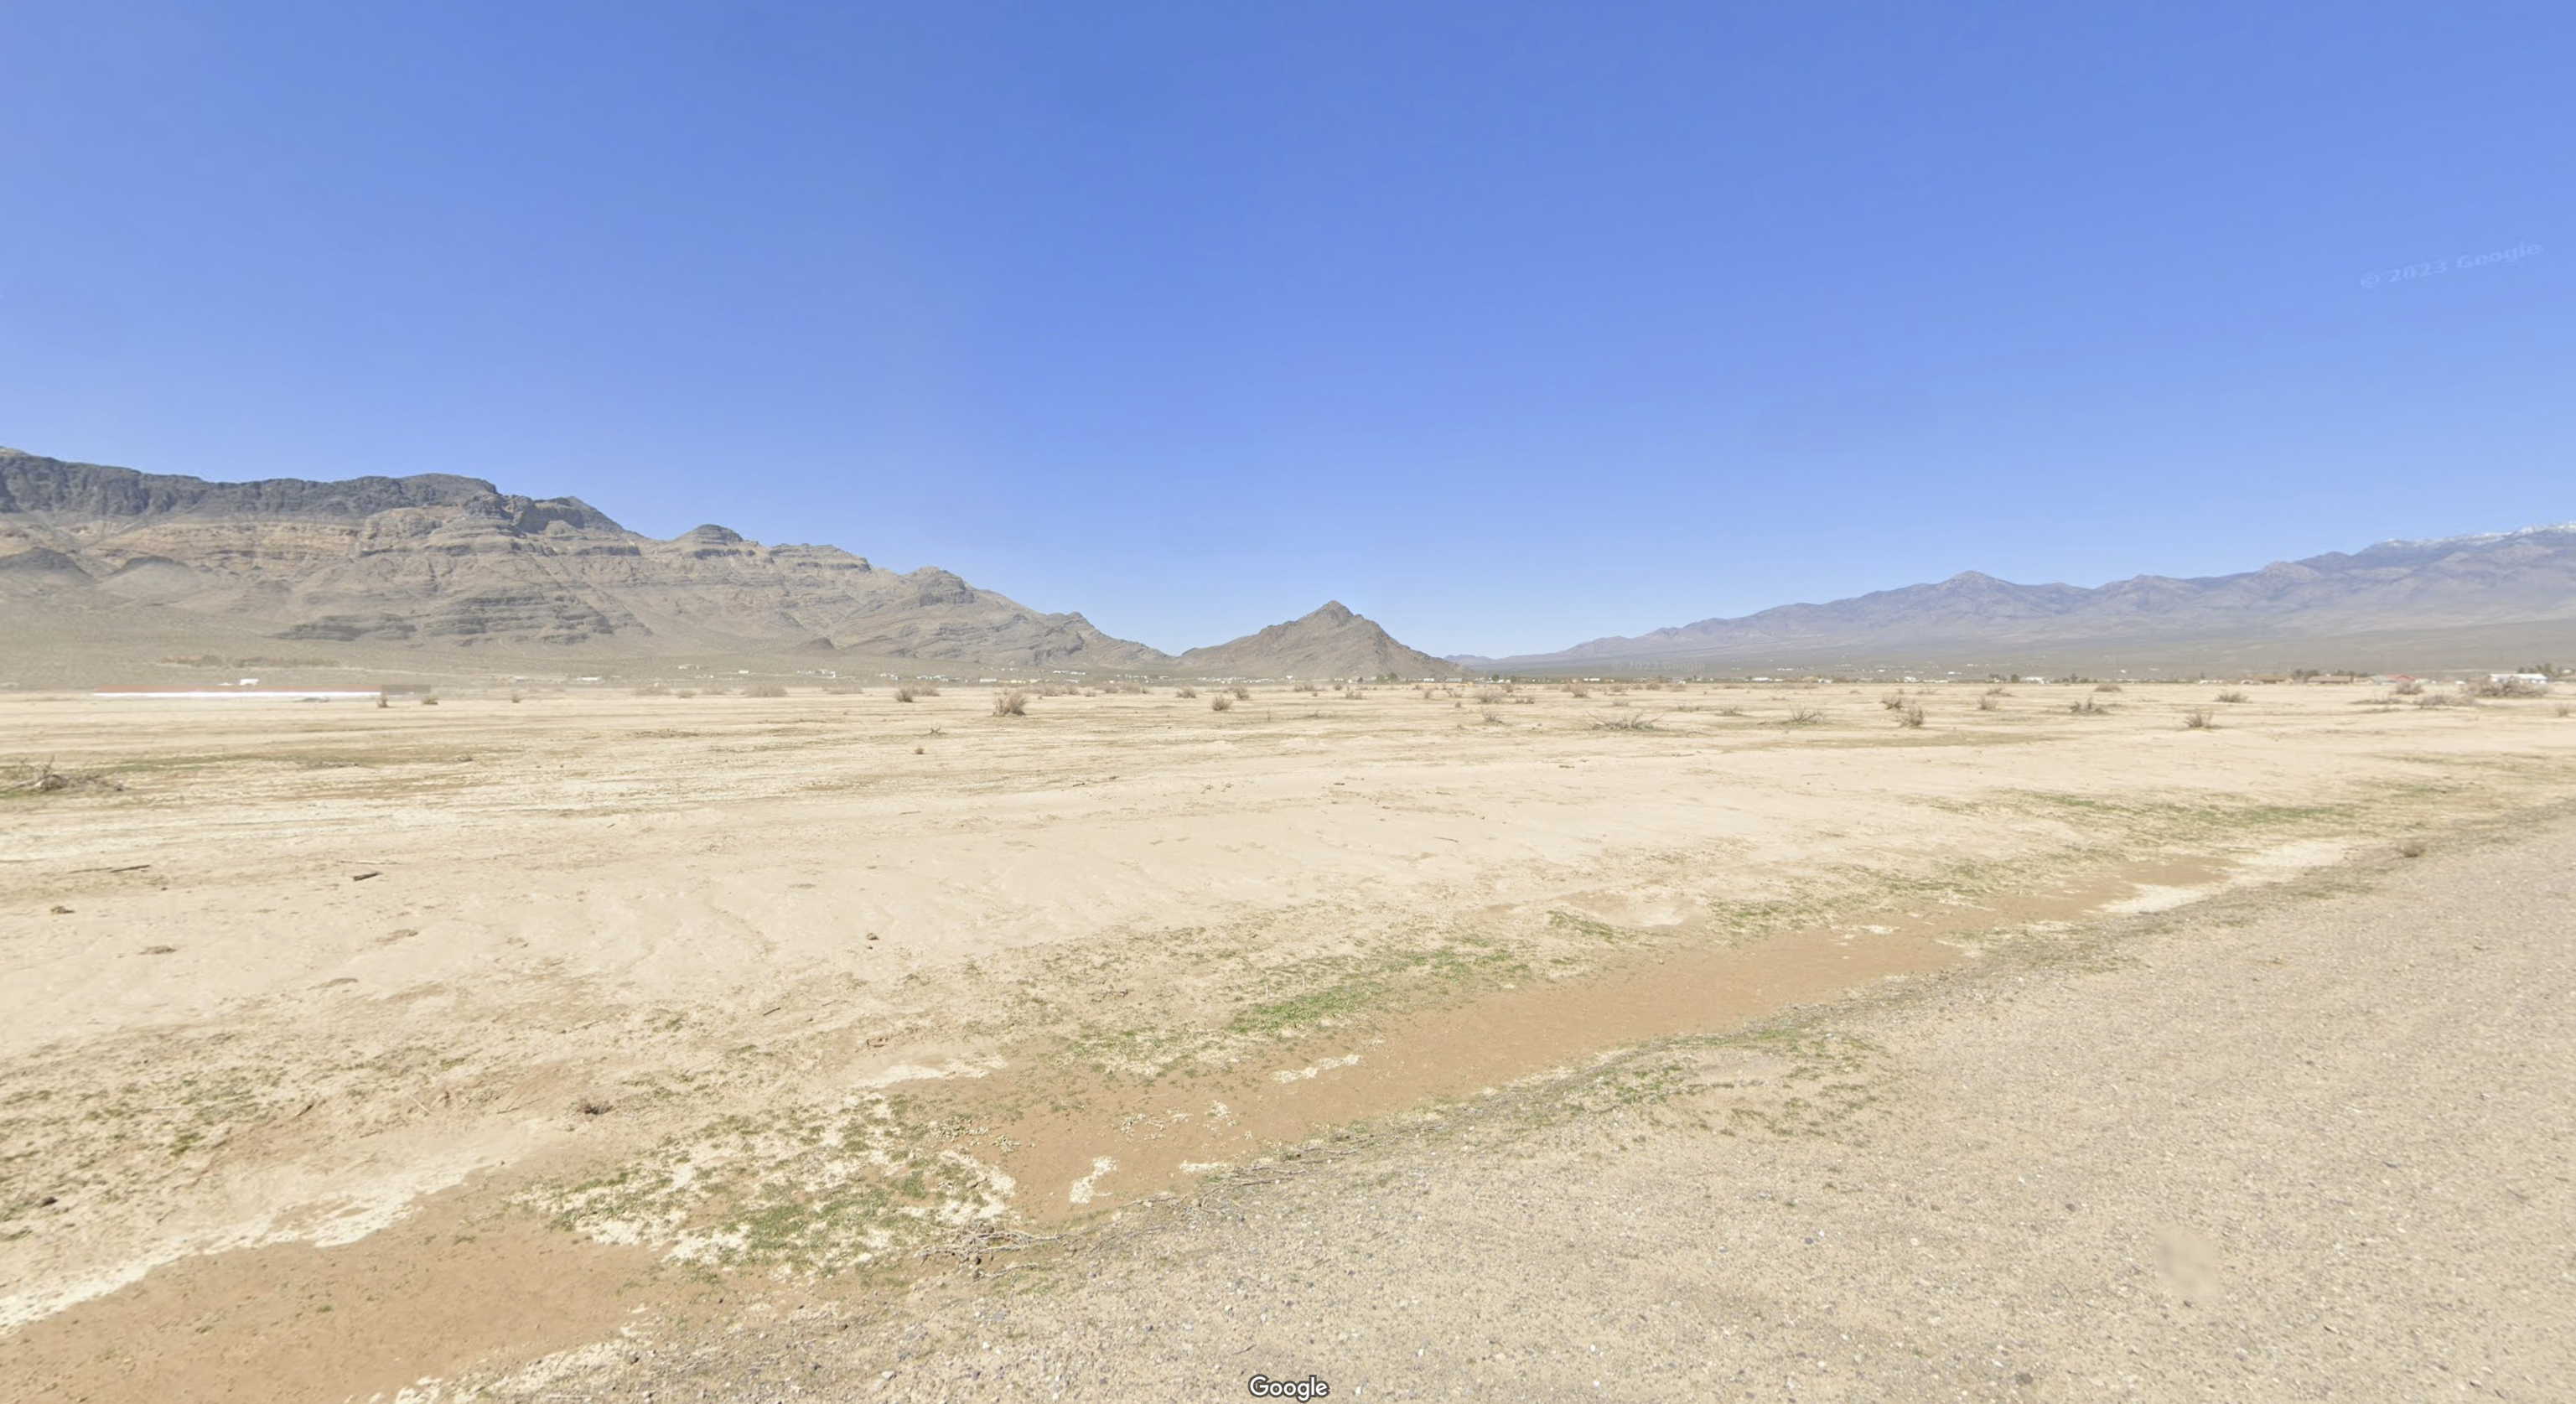 Camper submitted image from Pahrump Land in the middle of Mojave Desert - 1